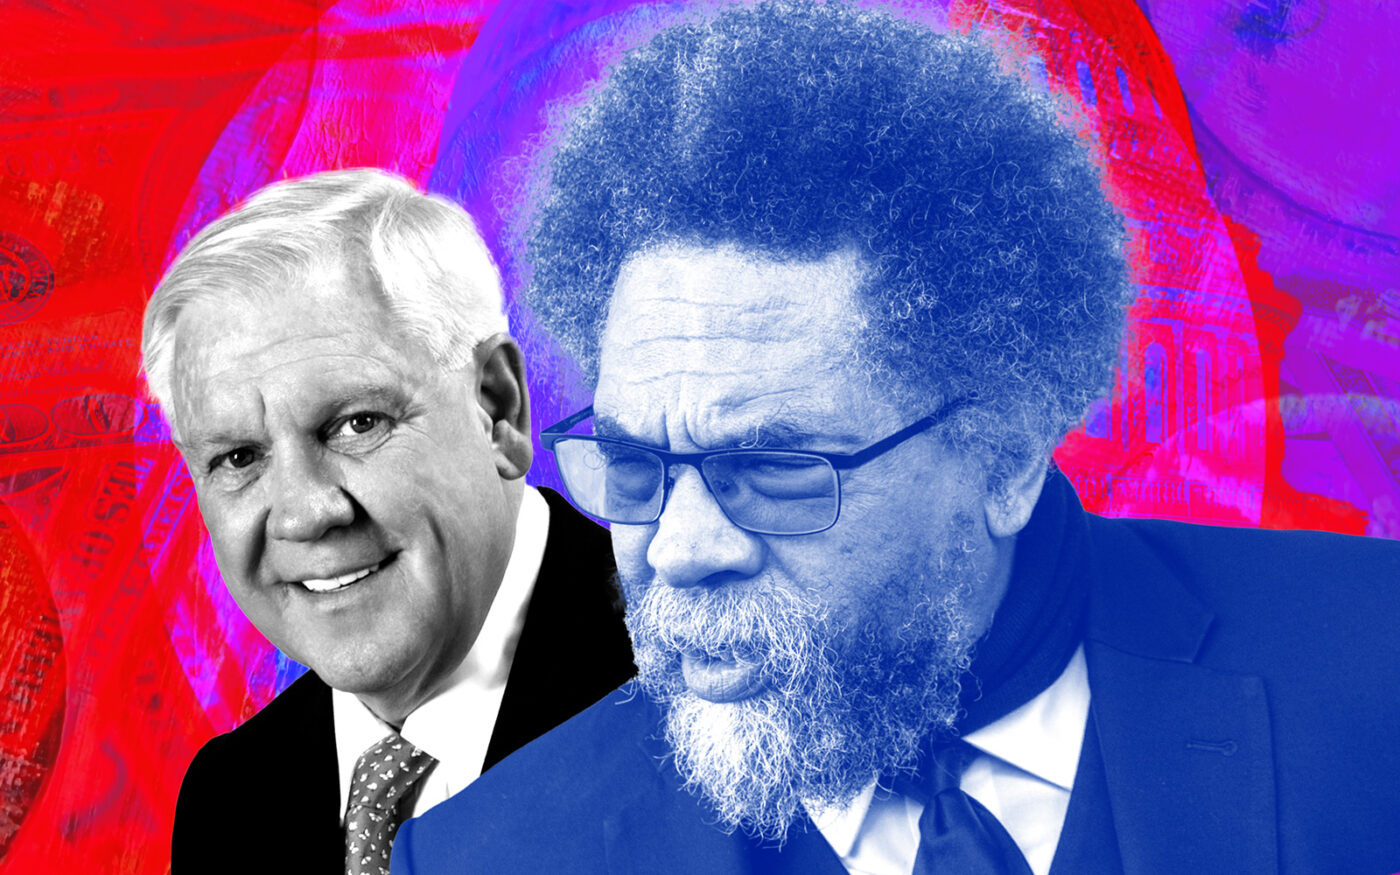 Harlan Crow Donated Maximum to Cornel West Presidential Campaign